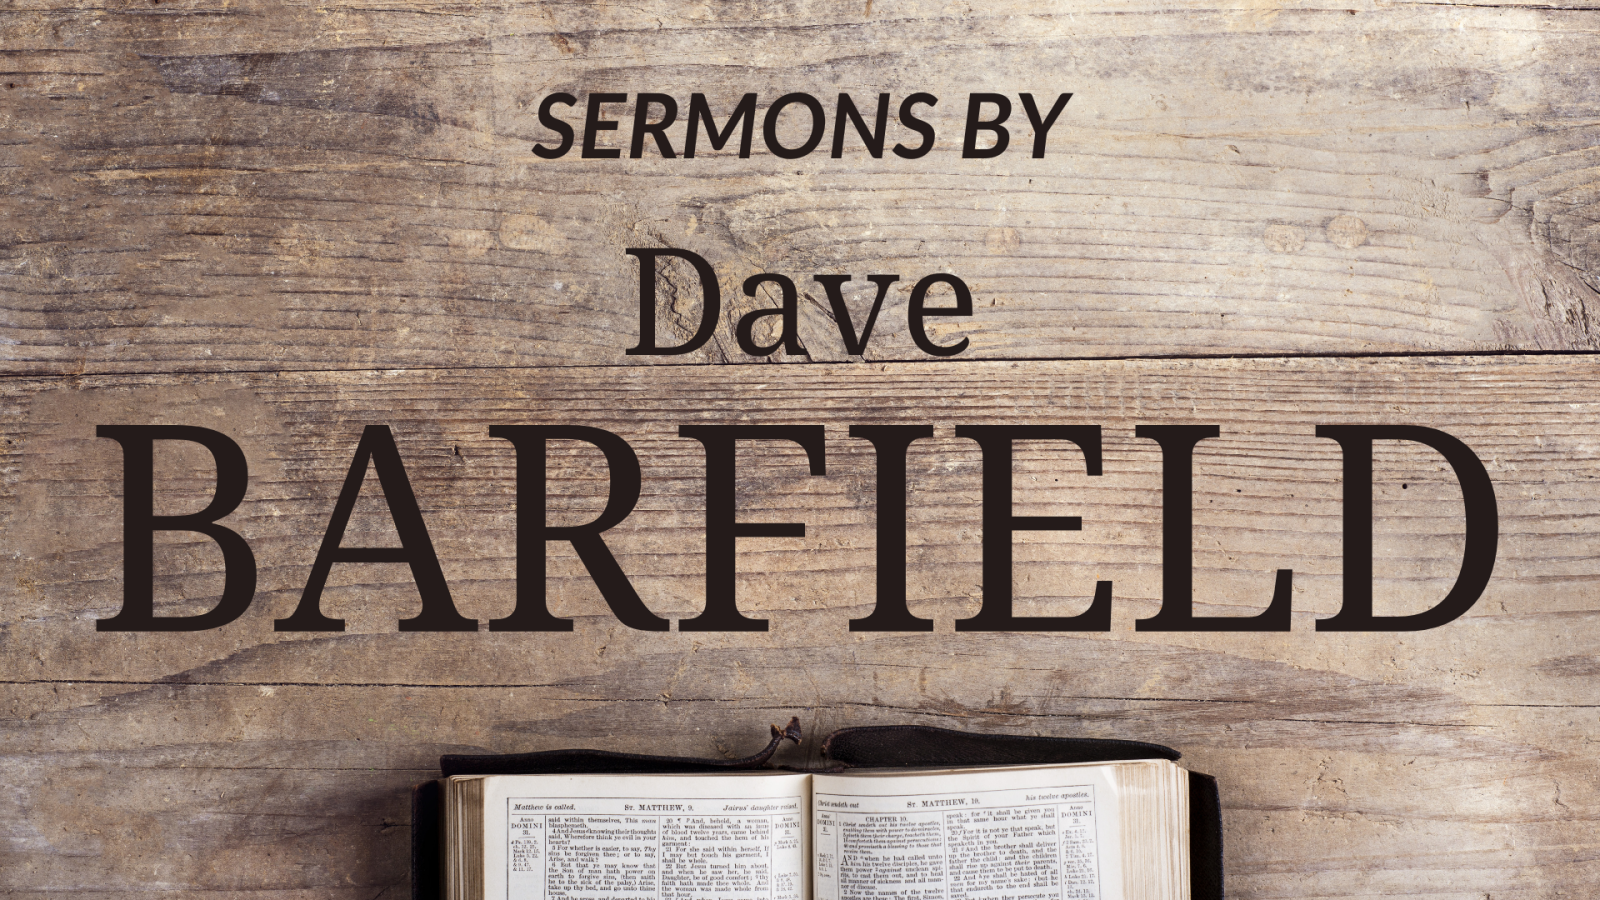 Sermons by Dave Barfield